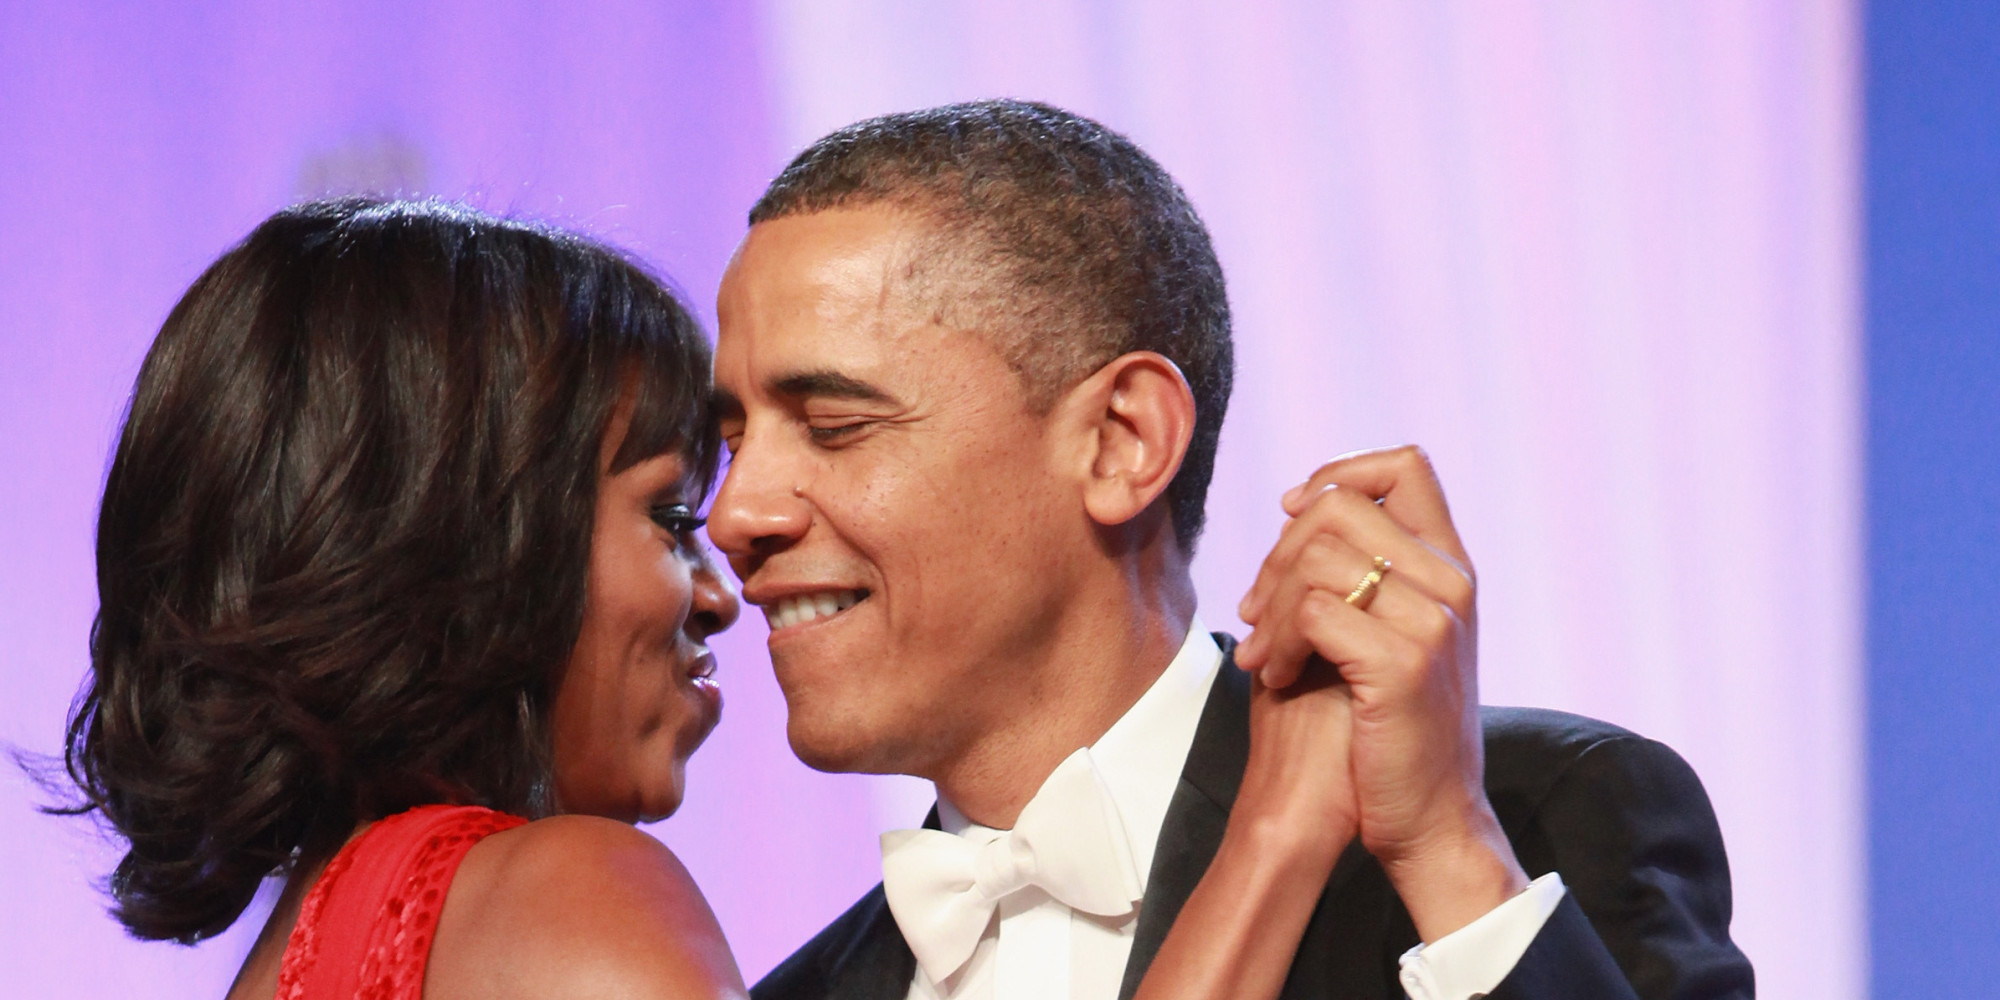 Barack And Michelle Obama's Love Story Is Getting The Hollywood Treatment | HuffPost